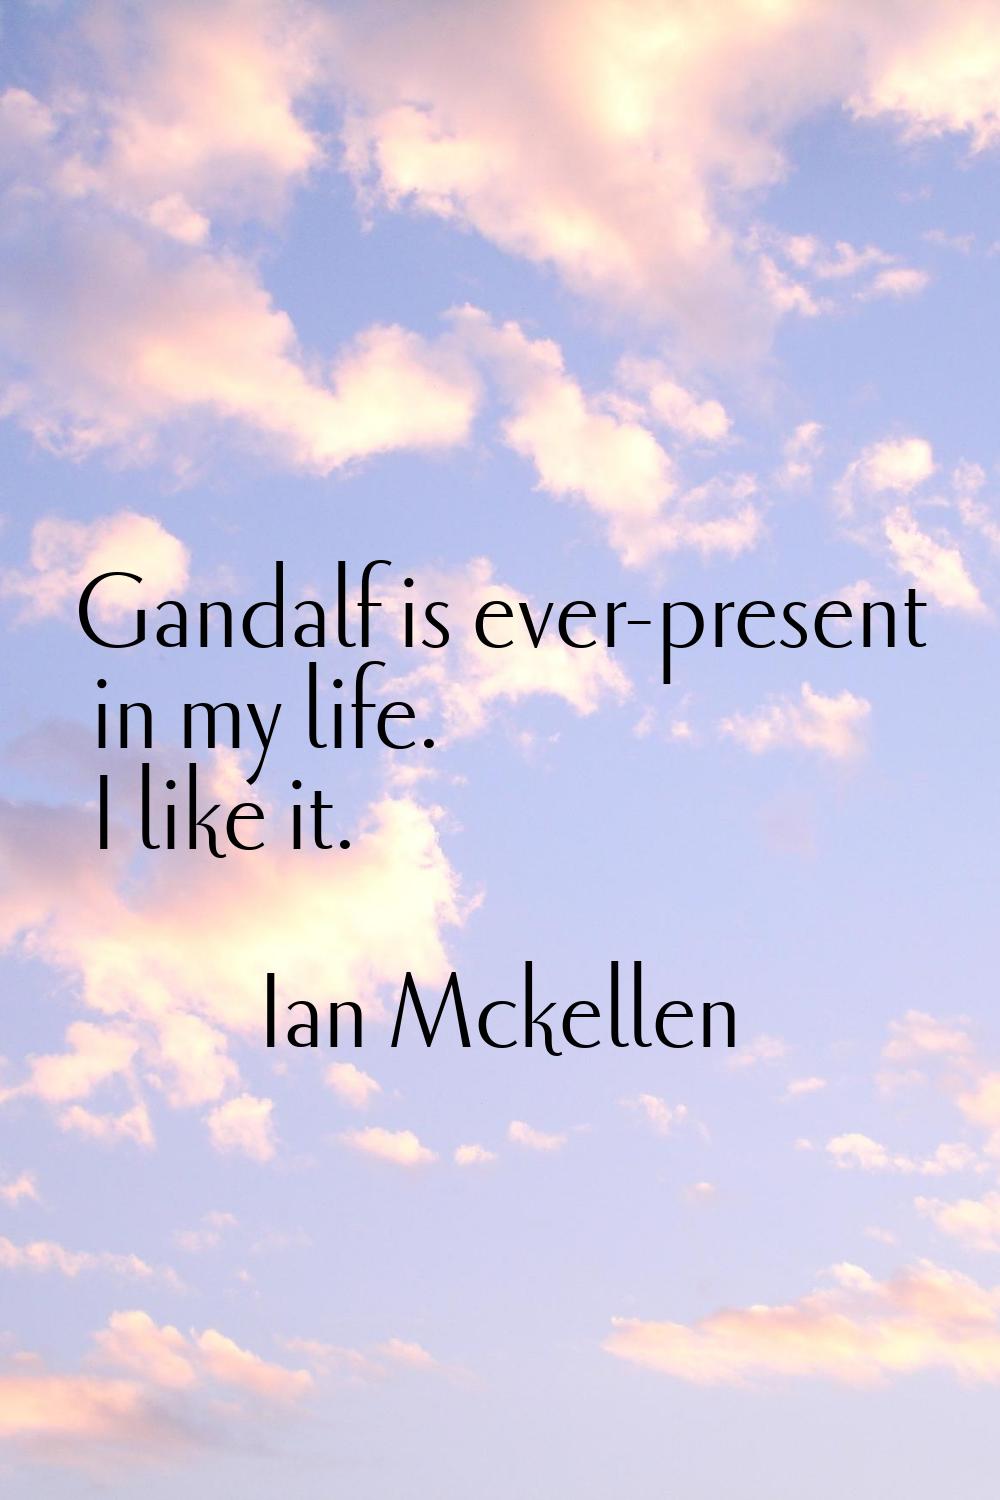 Gandalf is ever-present in my life. I like it.